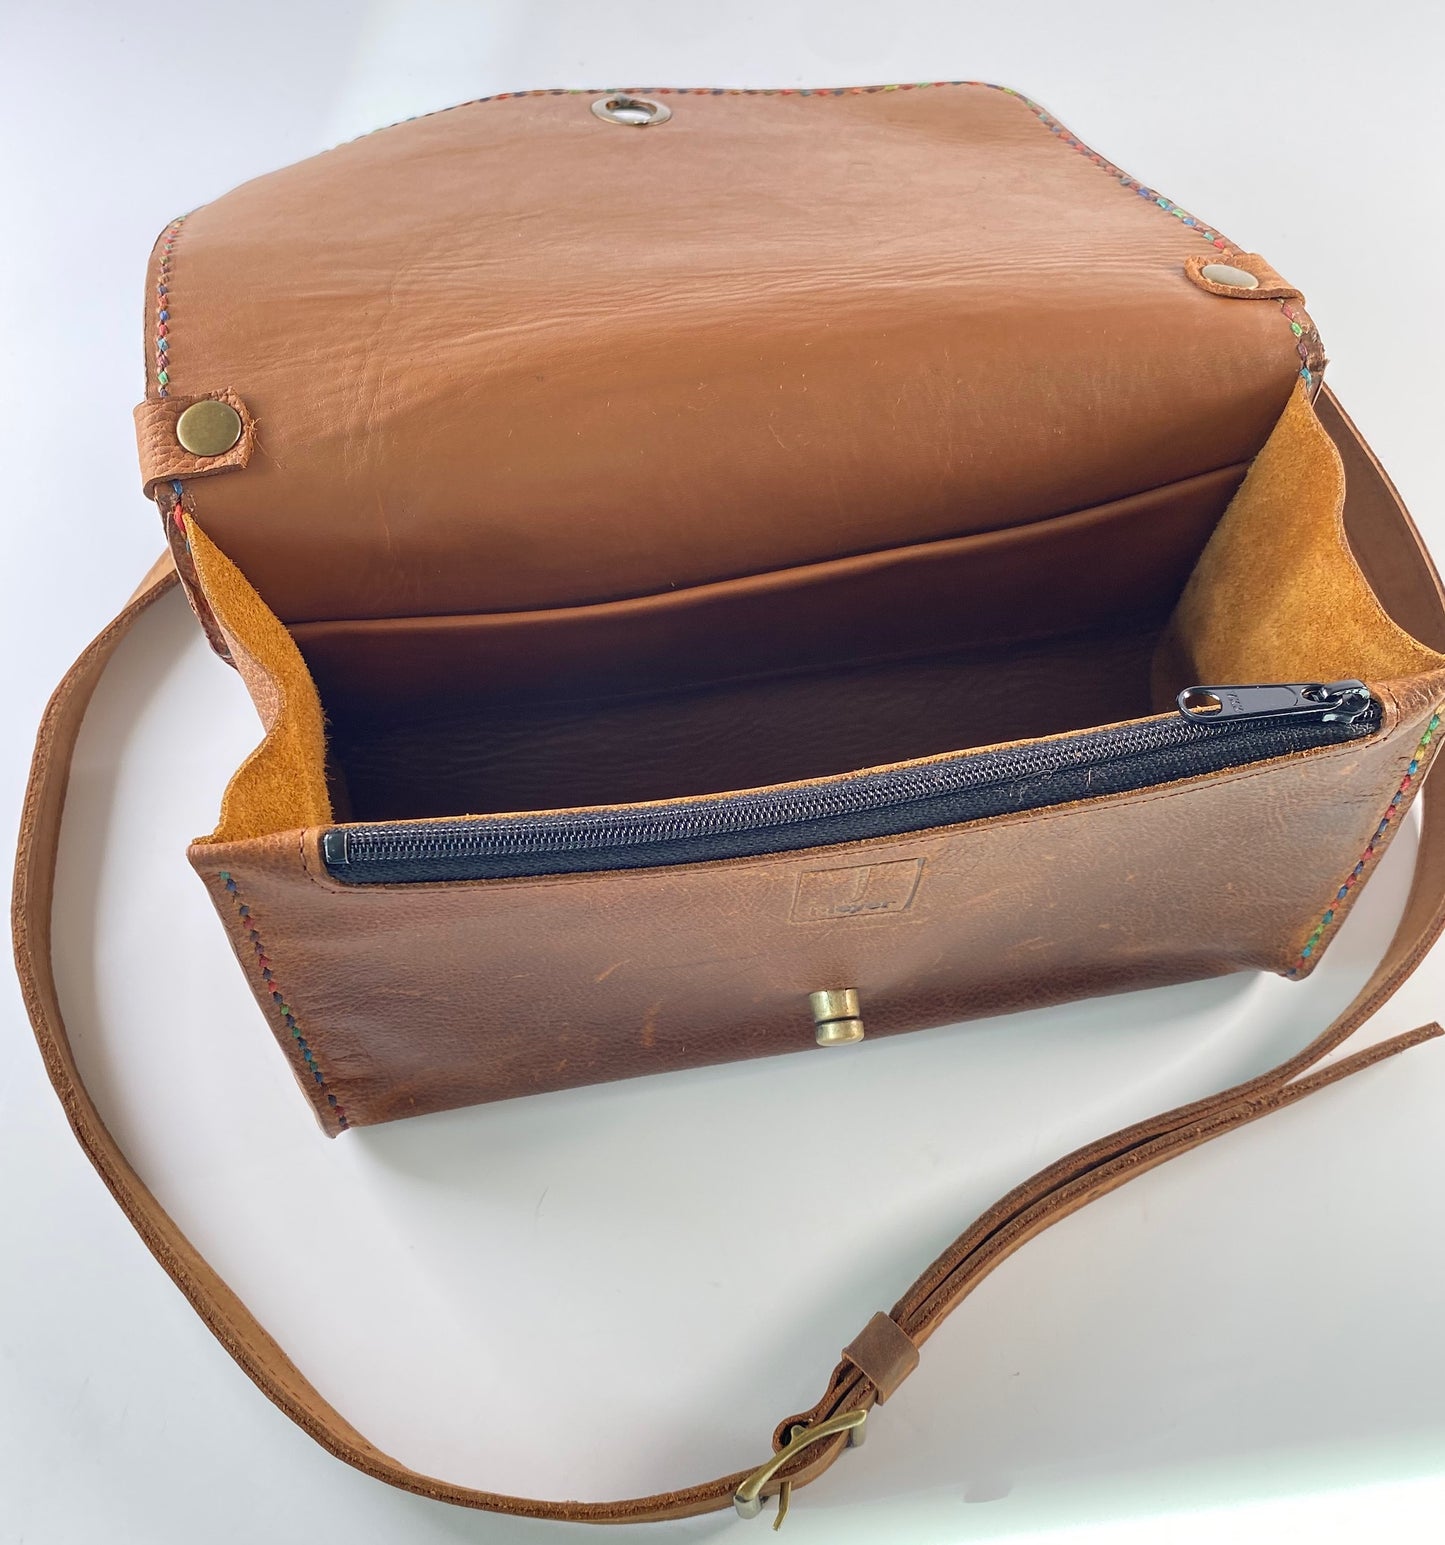 Oiled Leather Crossbody Bag - dark tan, hand-stitched